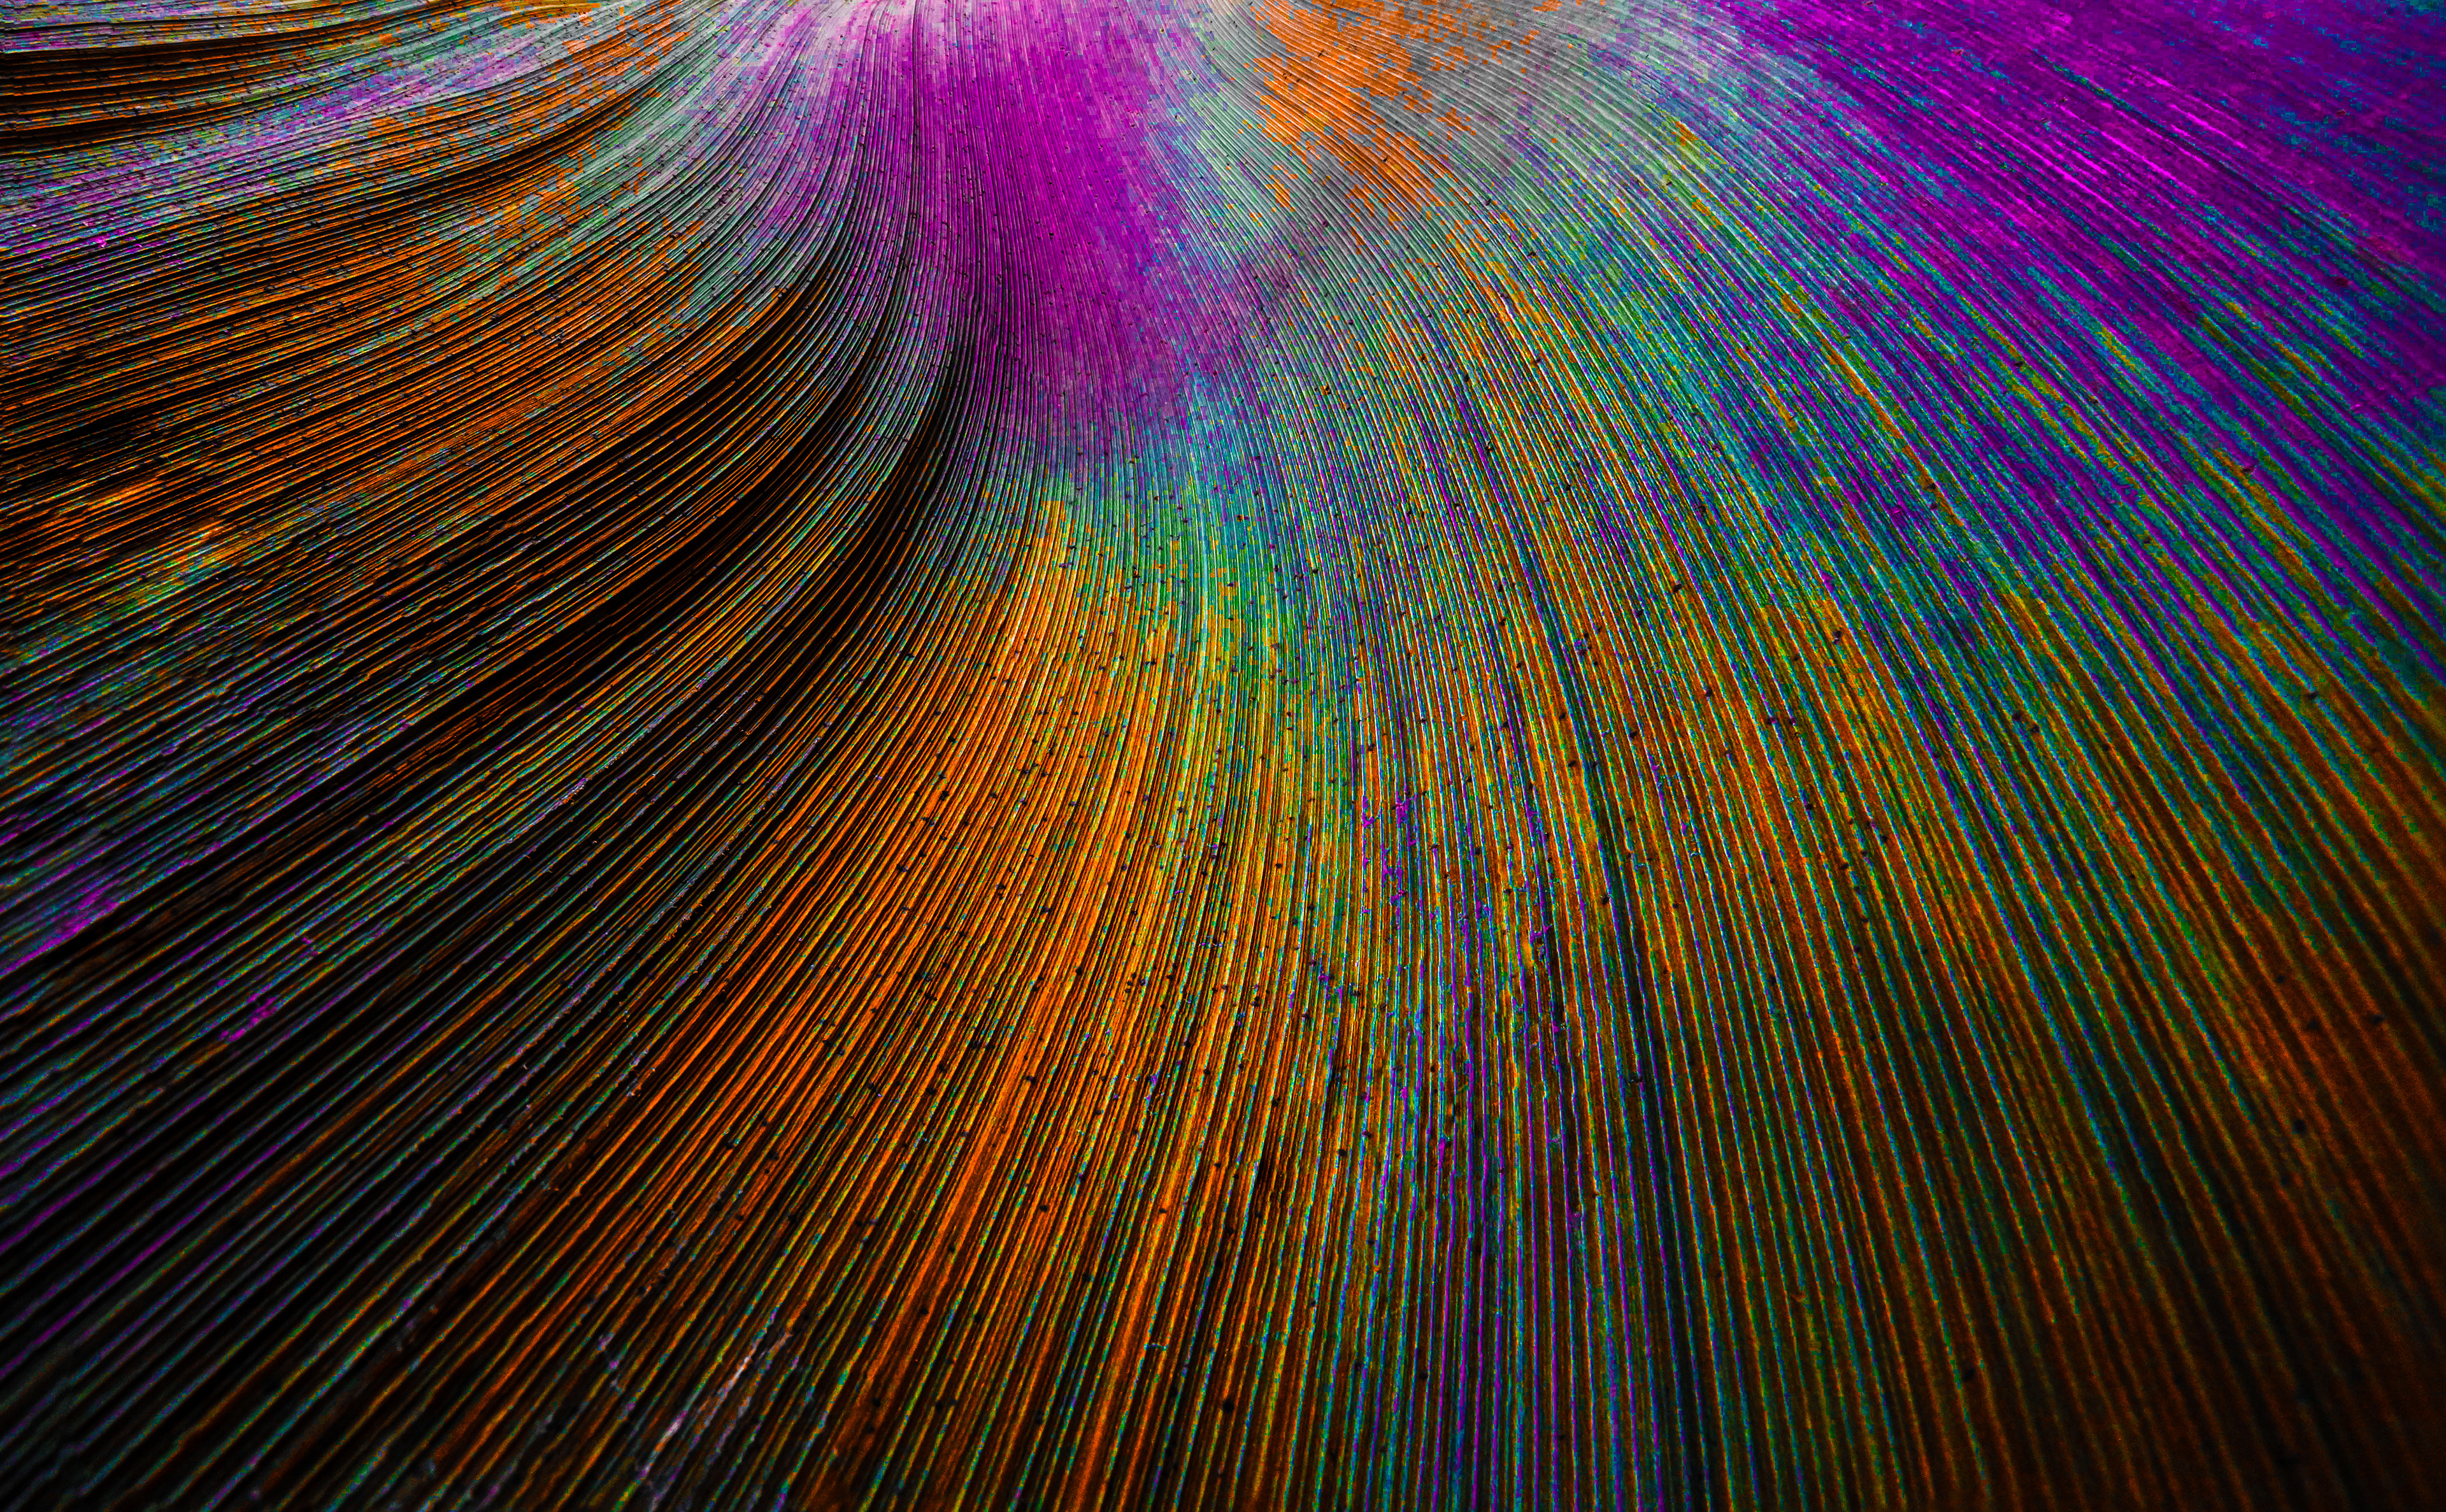 Peacock feather Wallpaper 4K, Curved lines, Colorful, Abstract, #1900